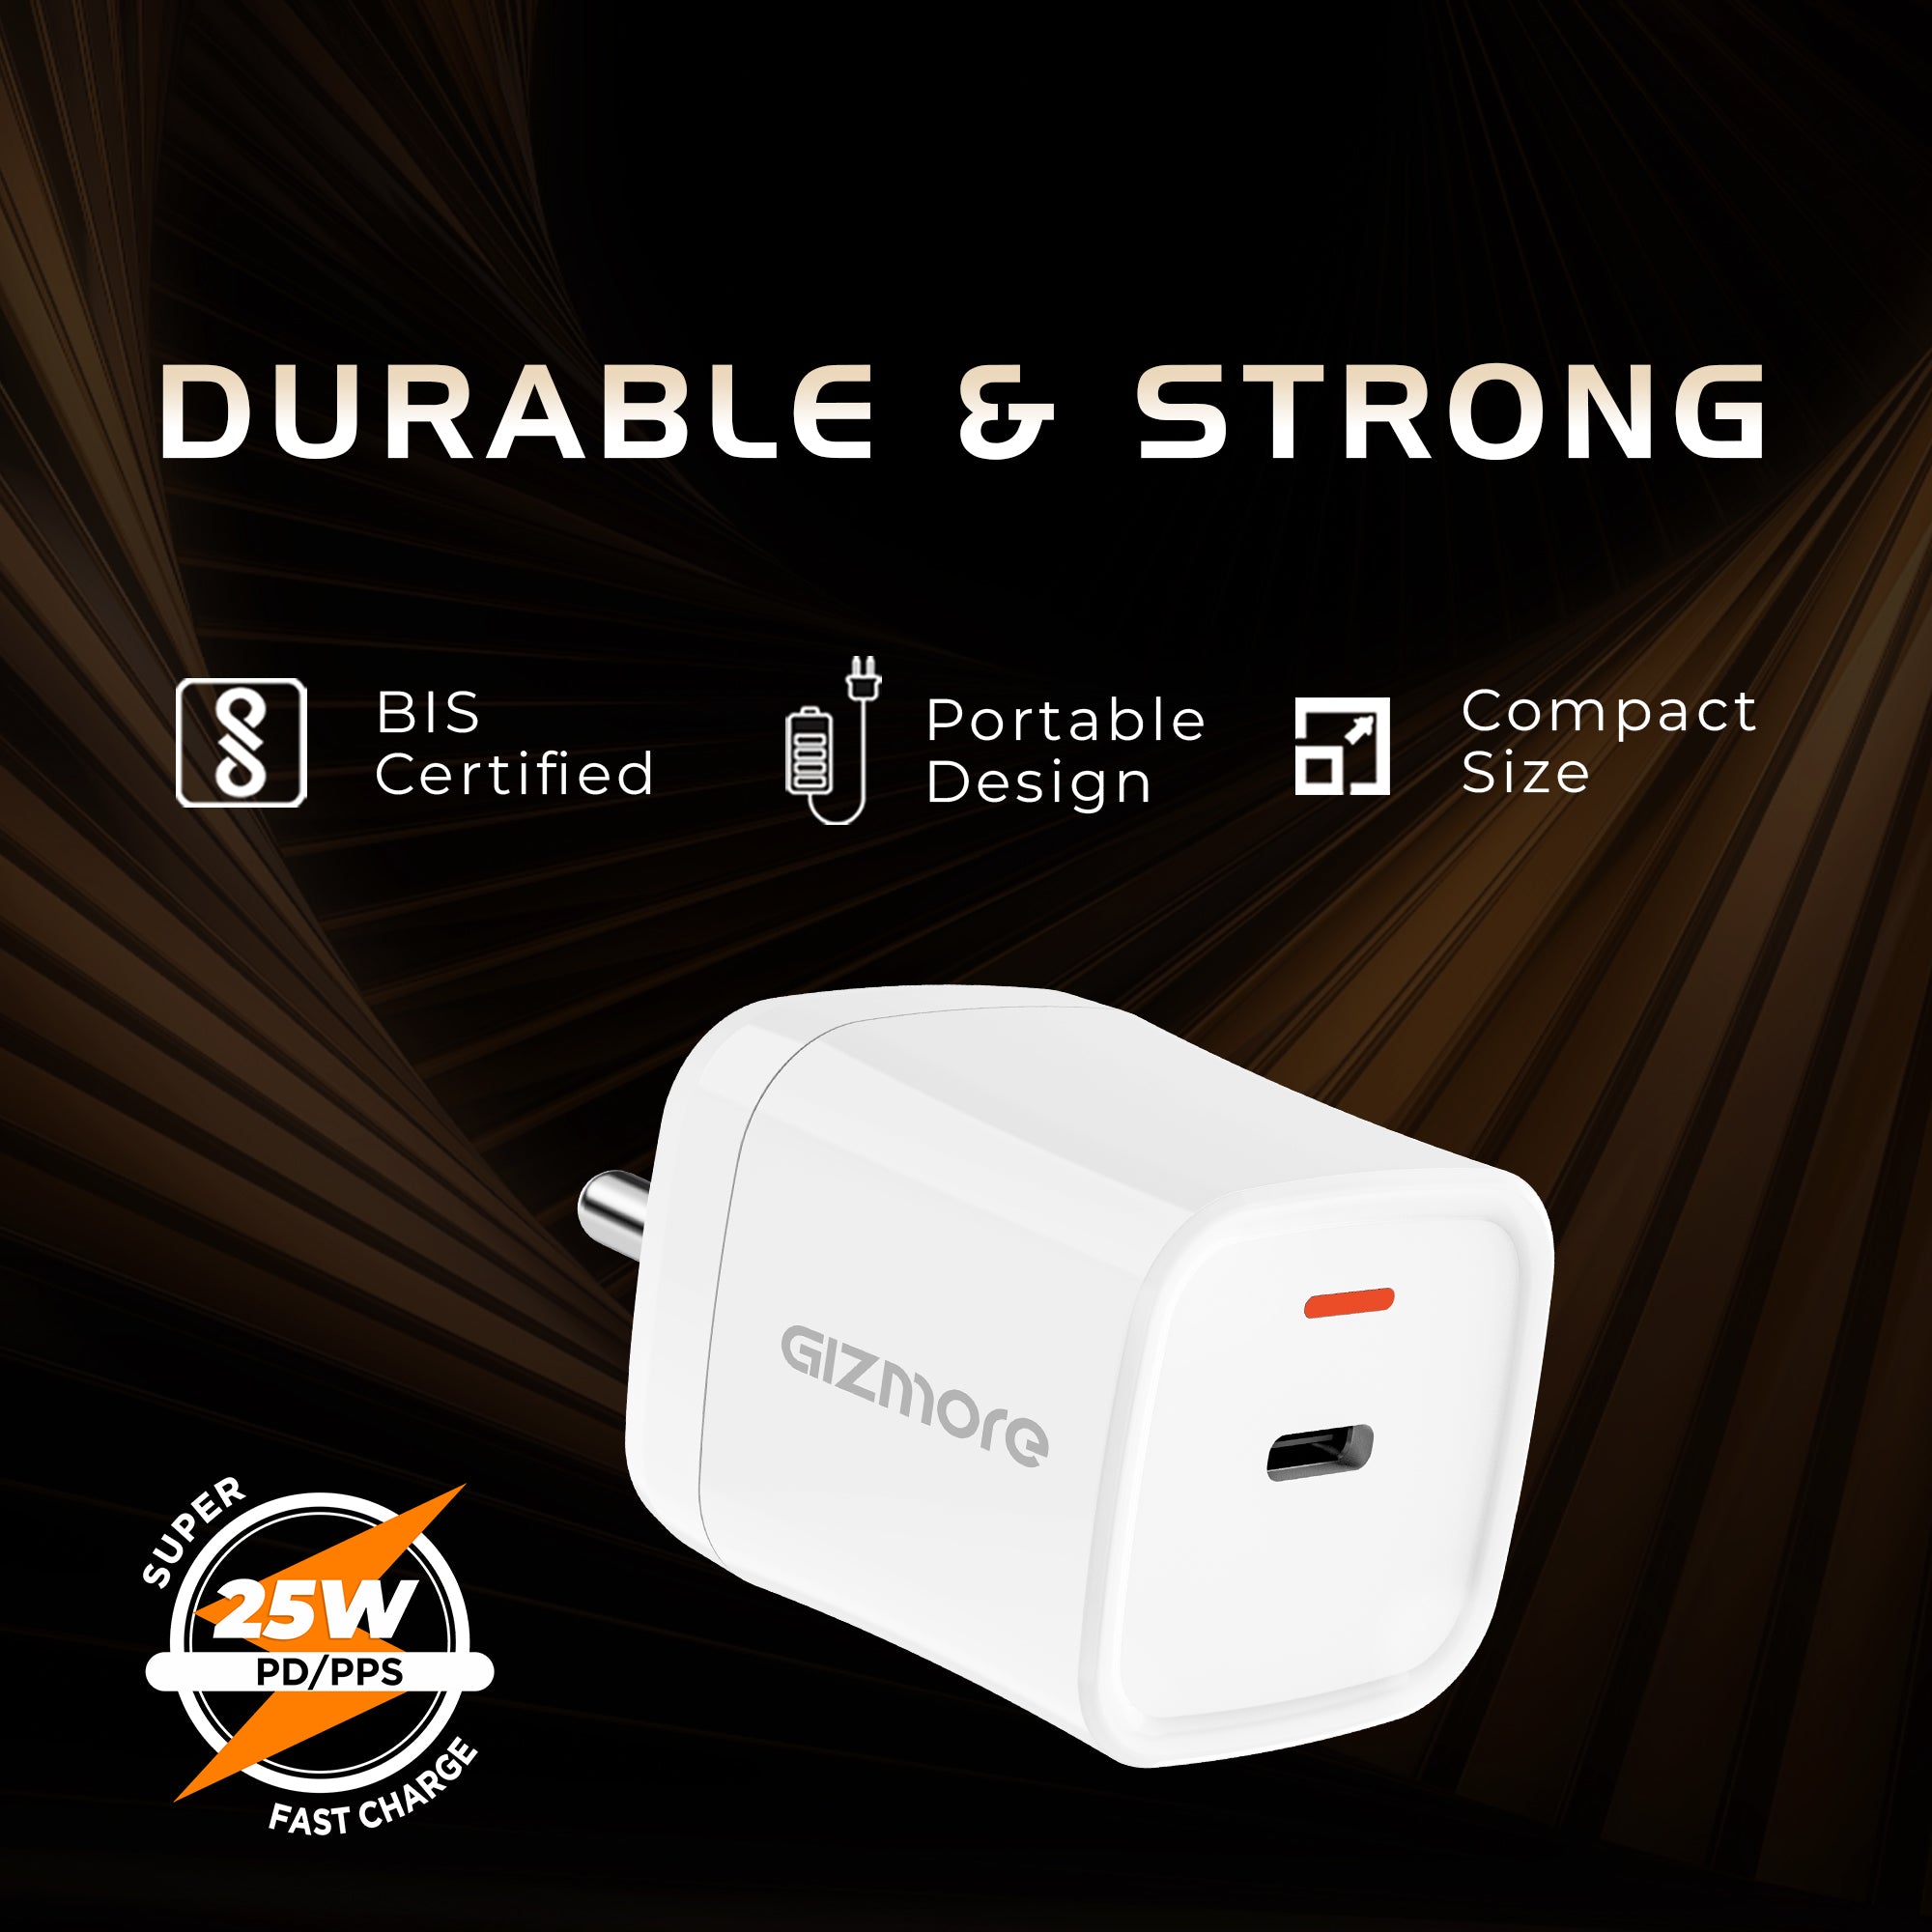 GIZMORE PA625 25W PD/PPS Type-C Super-Fast Charger Compatible with iPhone, Android and Other PD Devices, Versatile Protocol